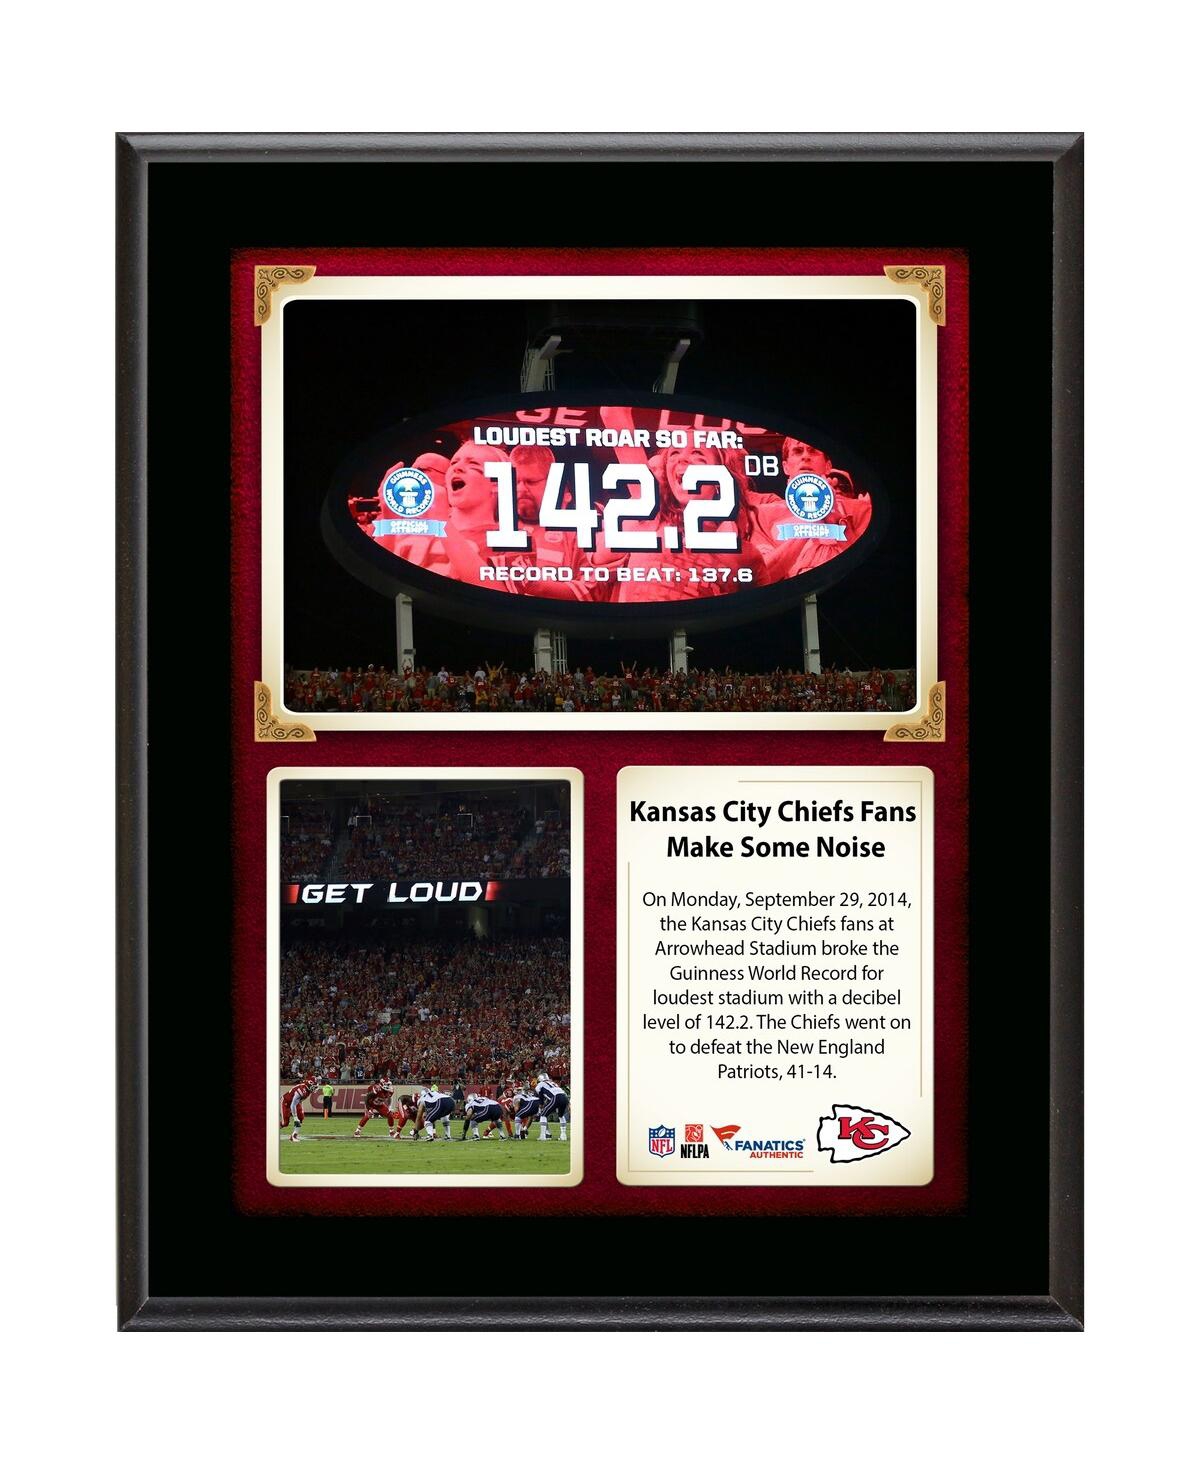 Fanatics Authentic Kansas City Chiefs Fans Break The Guinness Book Of World Record For Loudest Stadium Vs. New England  In Multi